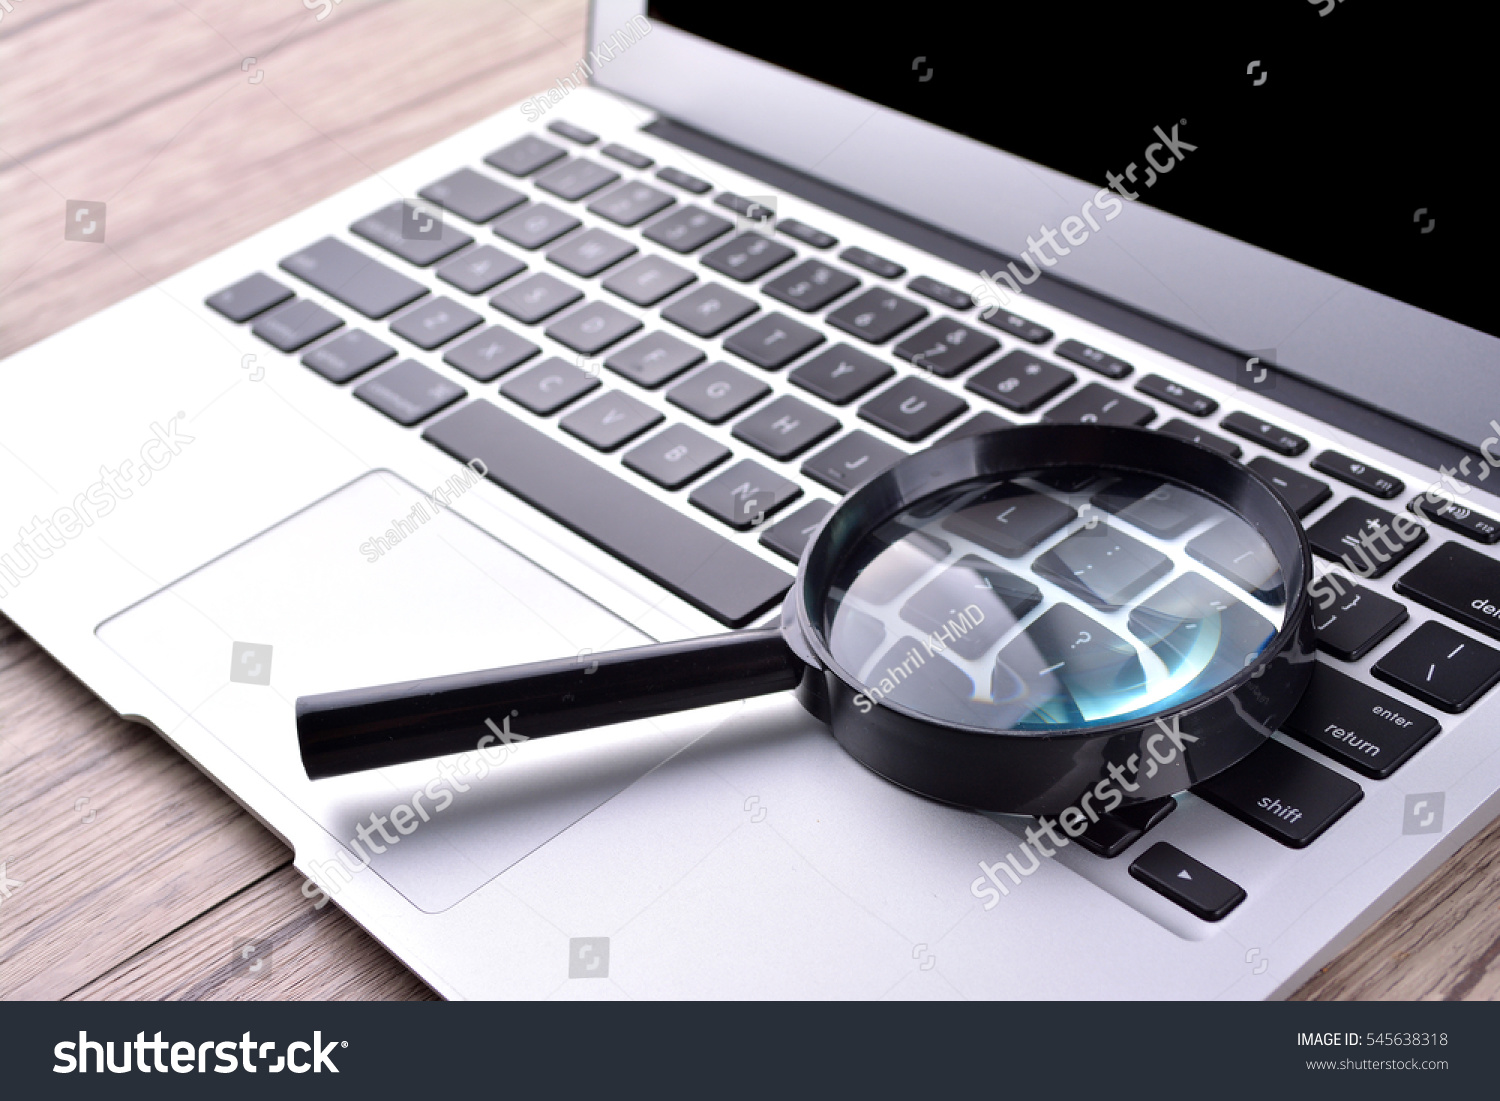 Image of a laptop computer with a magnifying glass hovering over the Enfissi.com website address in the browser, emphasizing the scrutiny and investigation of the site's legitimacy.